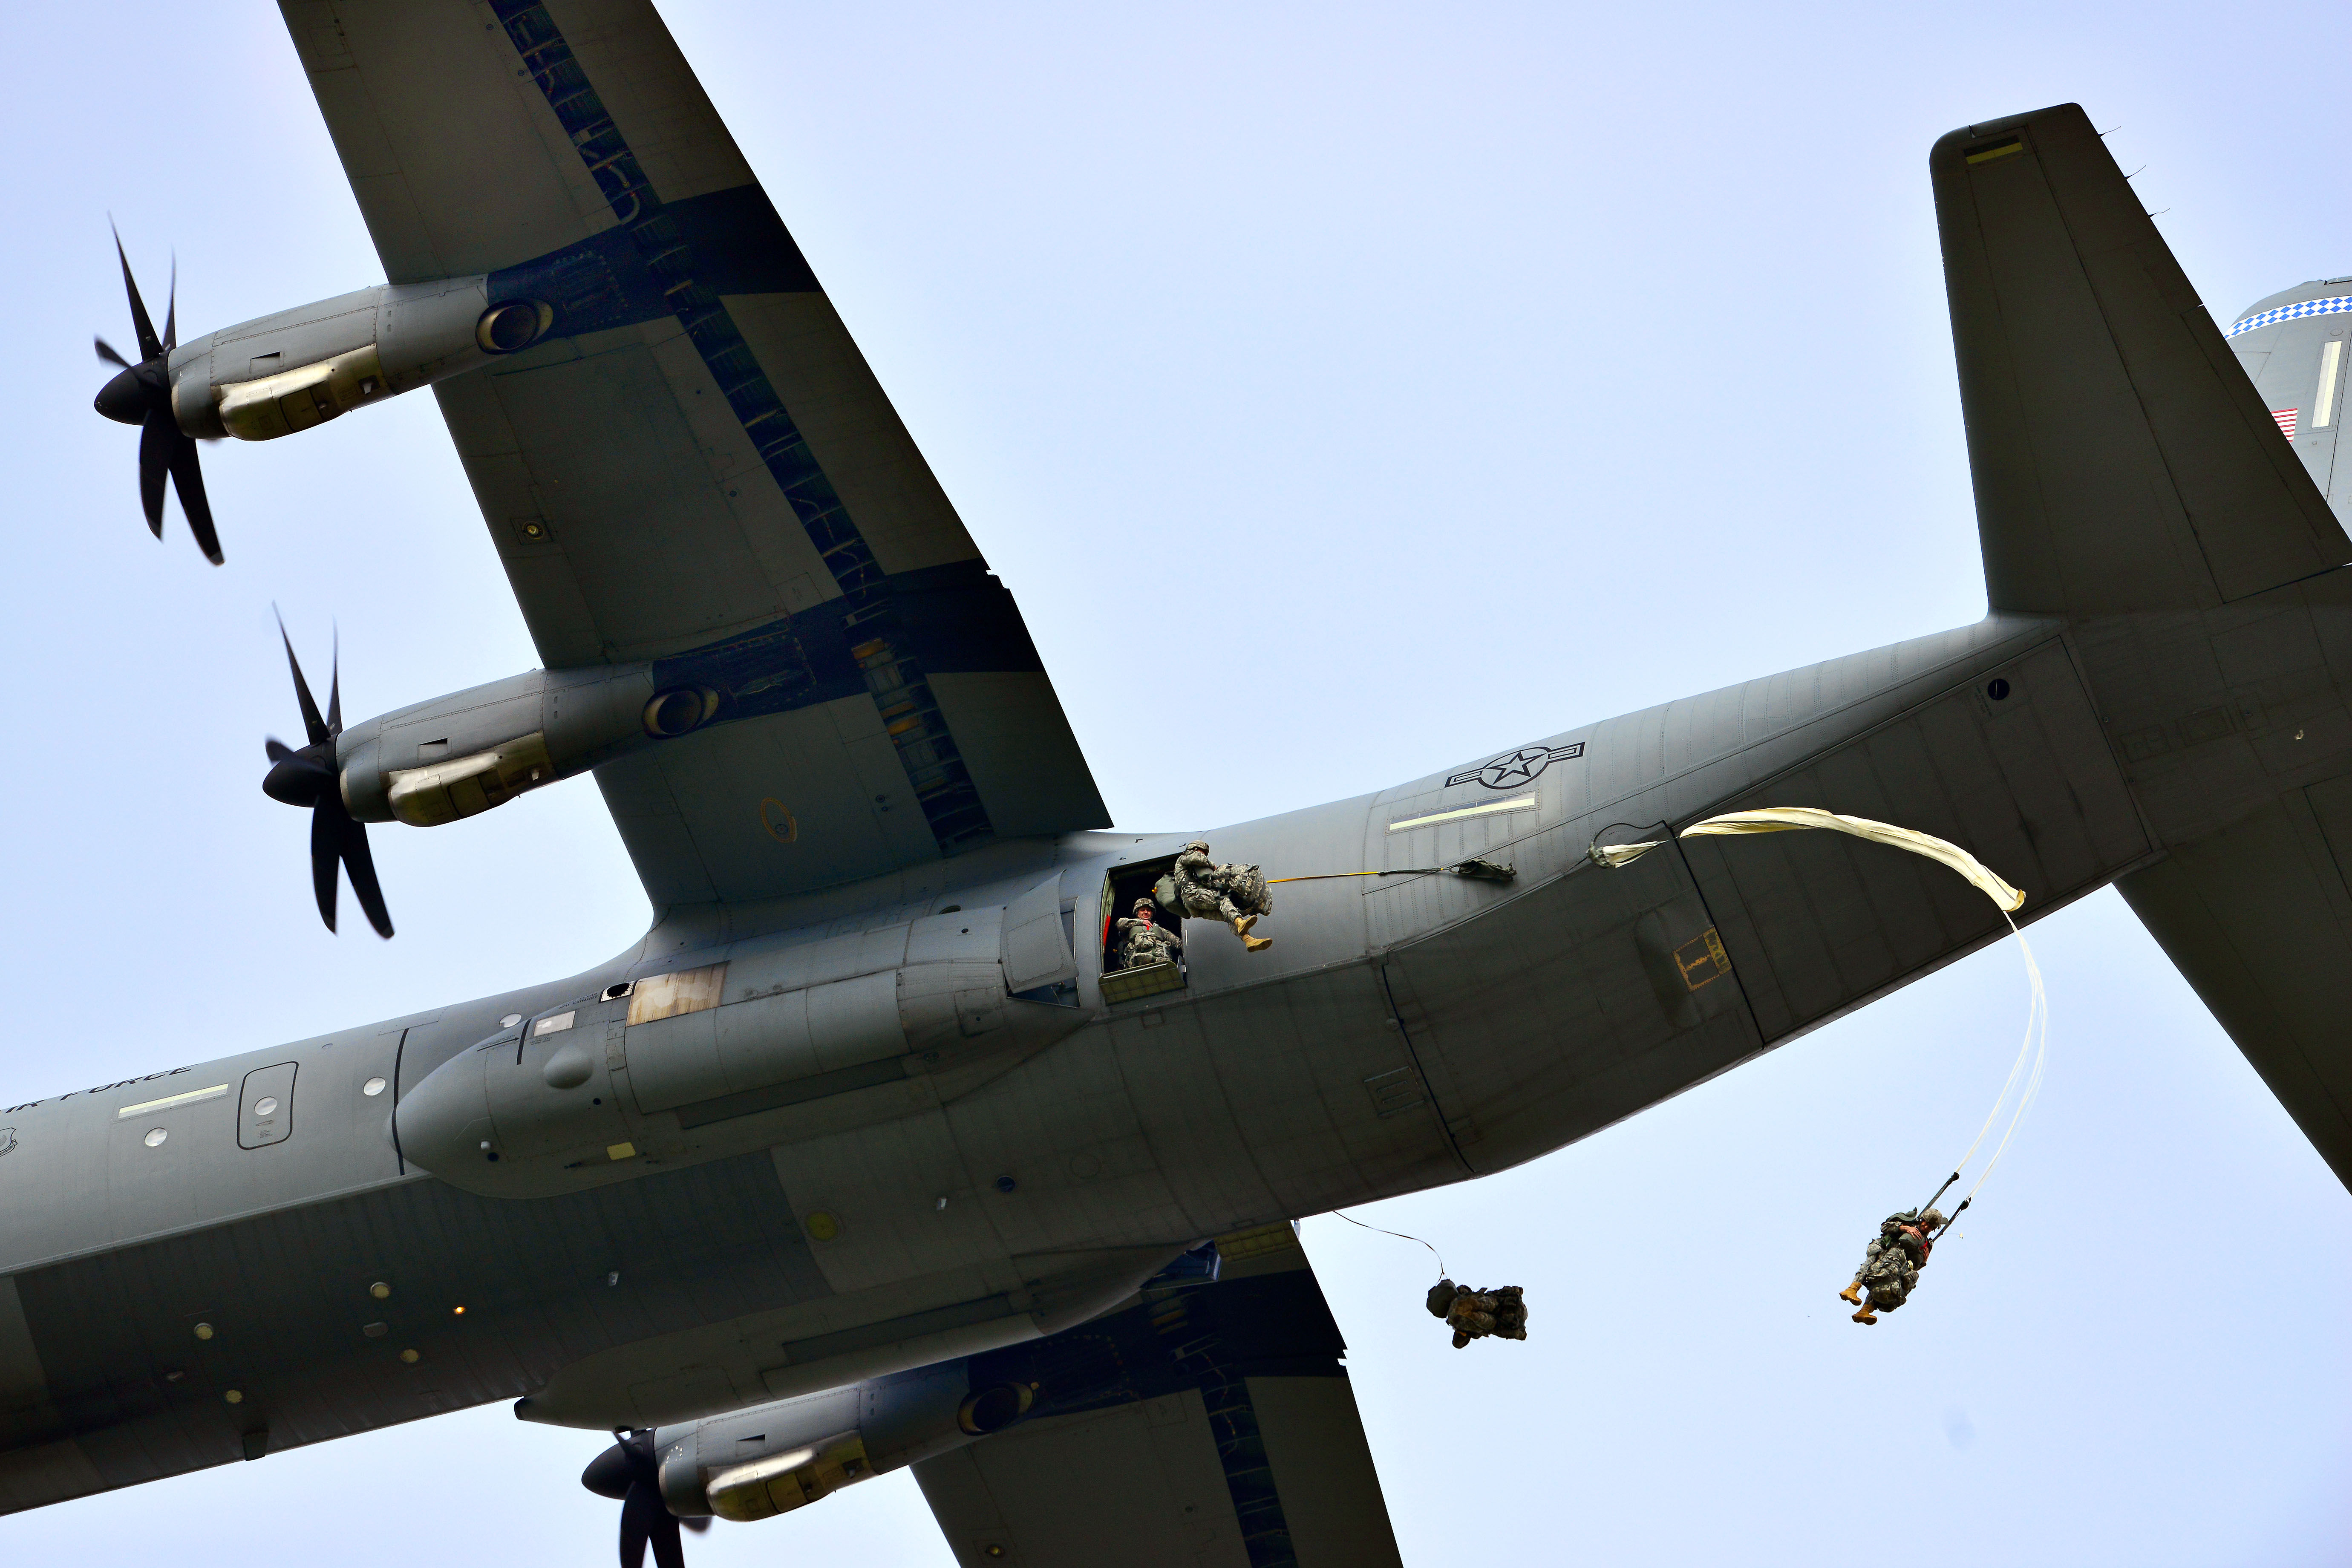 U.S. paratroopers utilizing T-11 parachutes conduct an airborne operation  from a C-130 Hercules aircraft